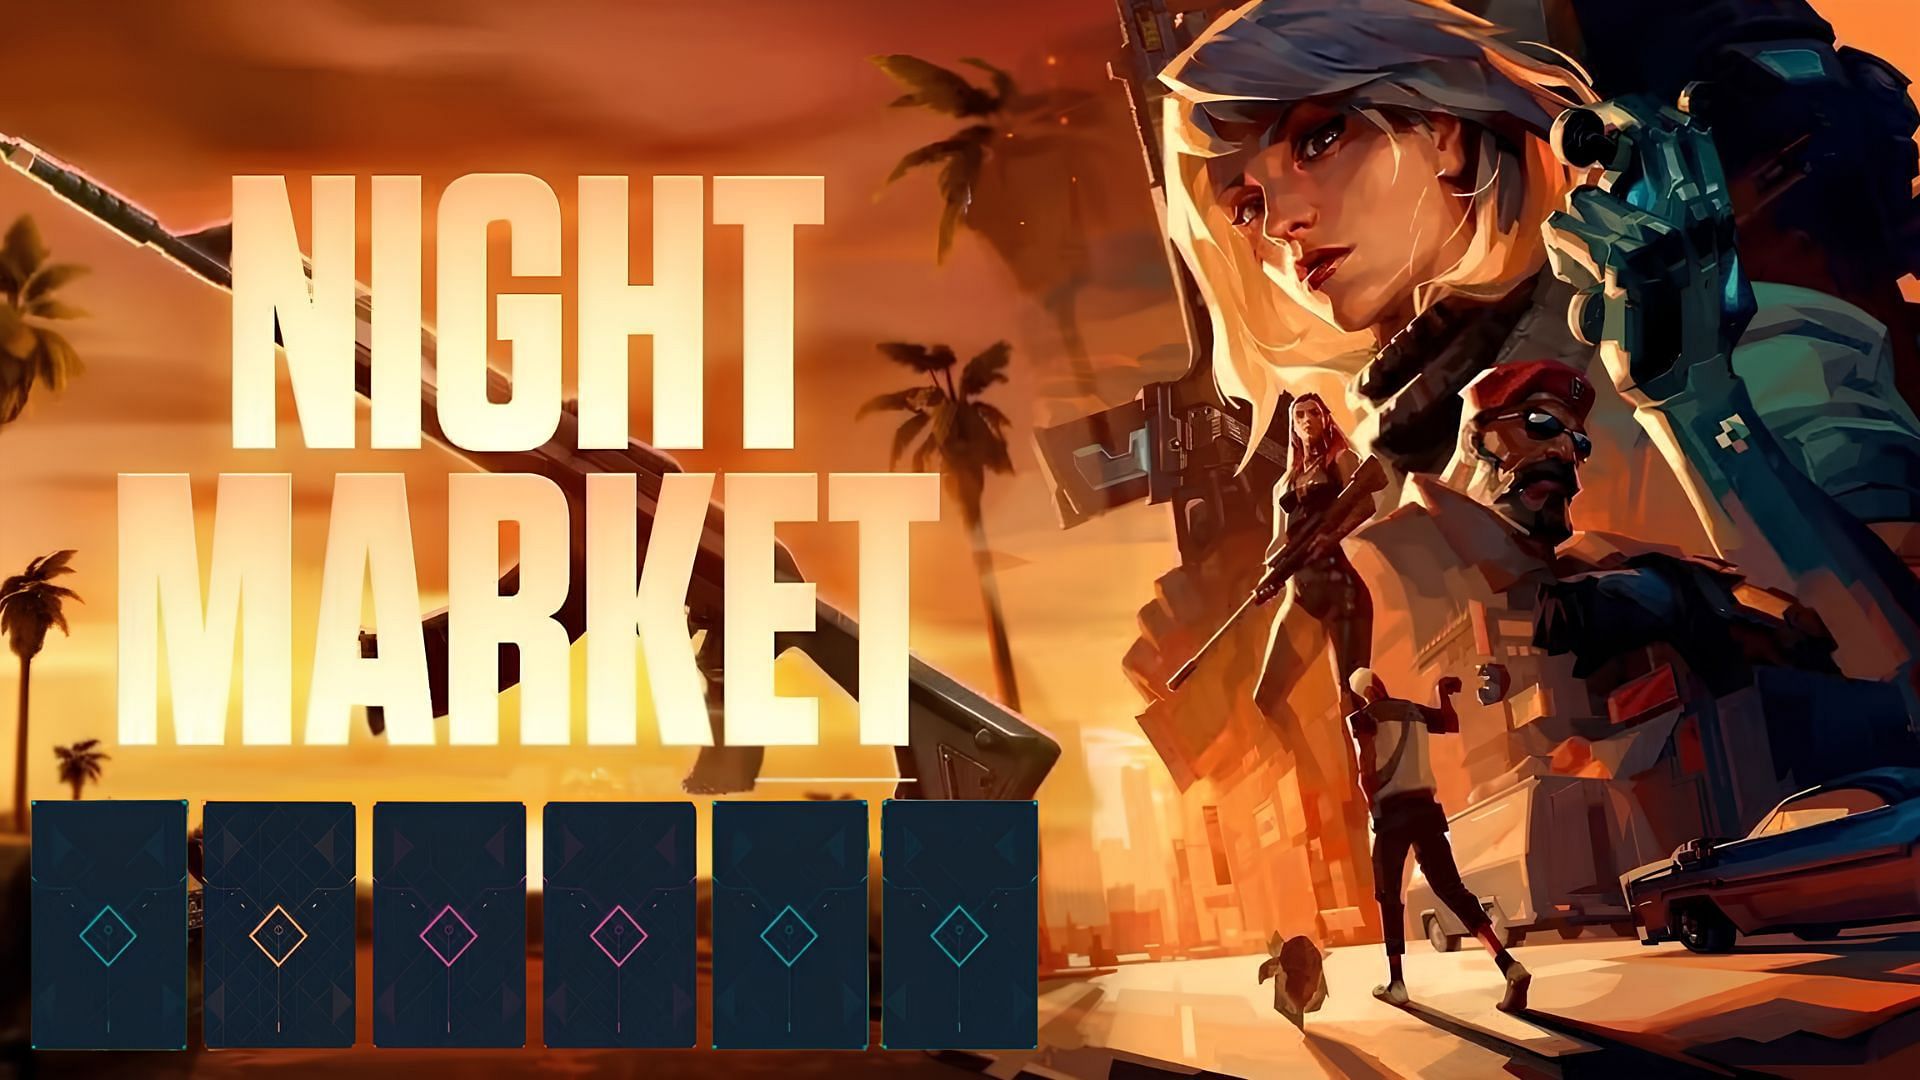  Episode 7 Act 2 night market is reportedly coming soon to Valorant (Image via Riot Entertainment and Sportskeeda)